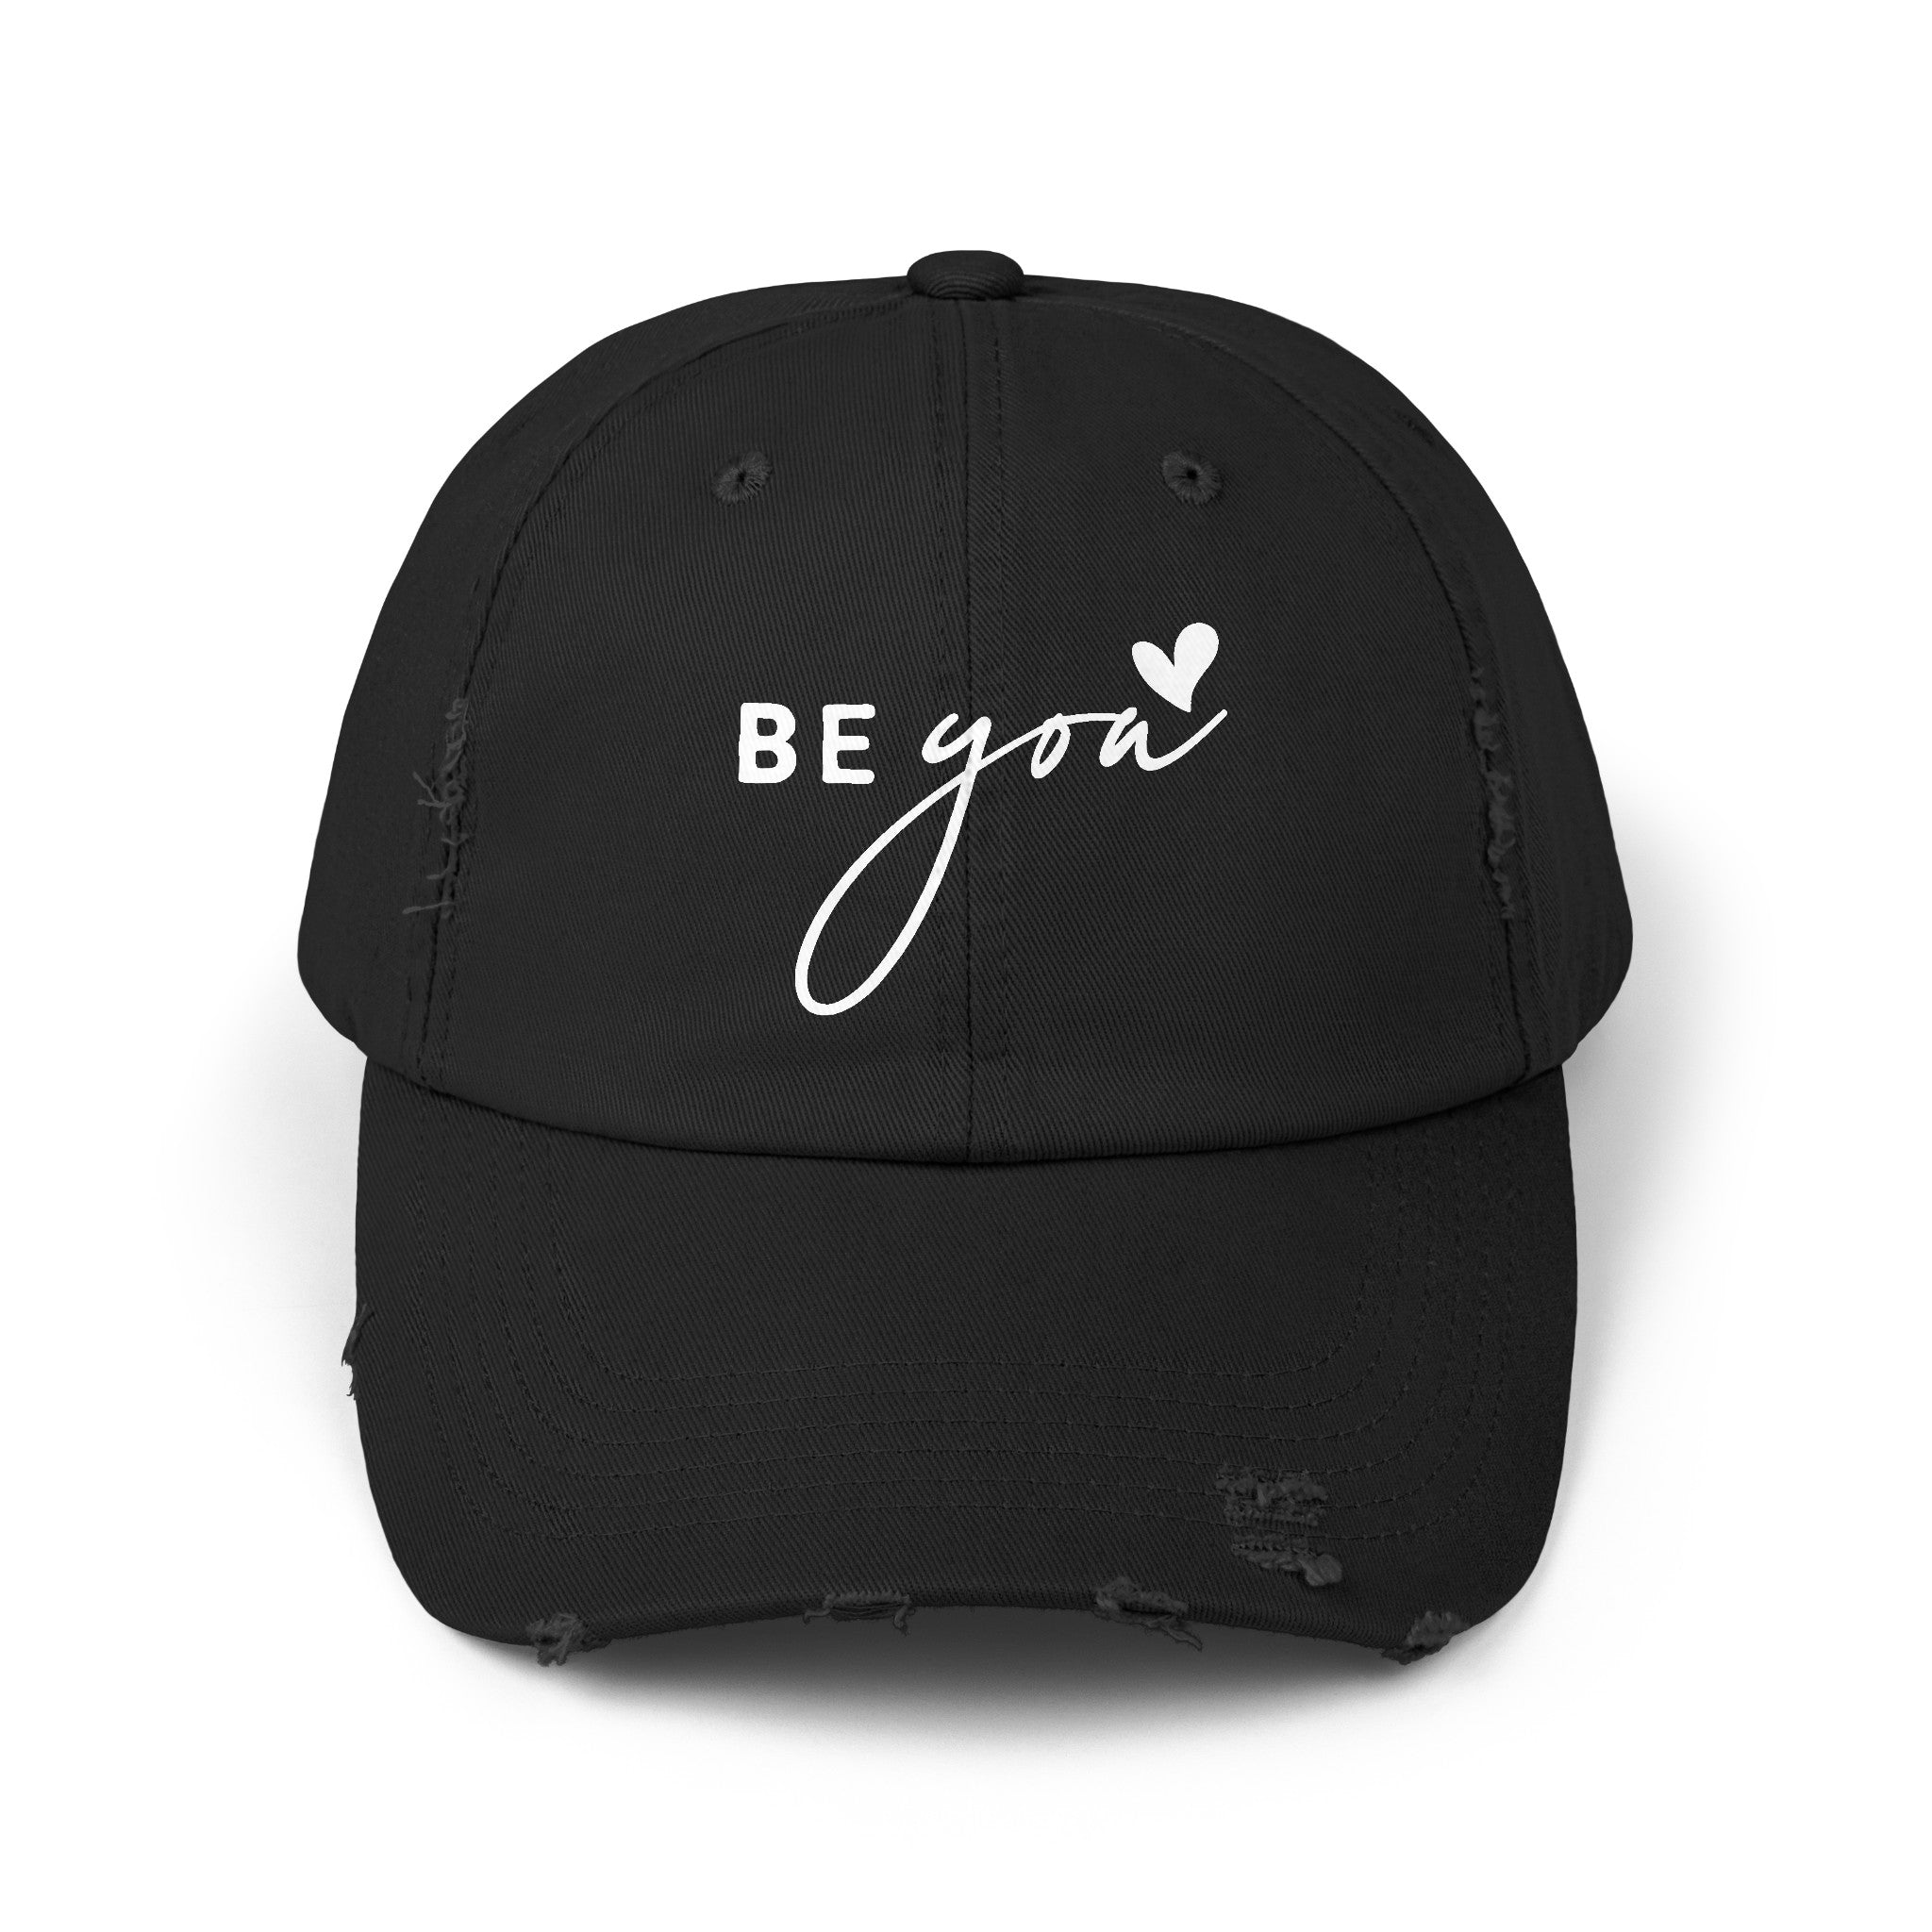 Distressed Cap Be YOU - Black / One size - Hats